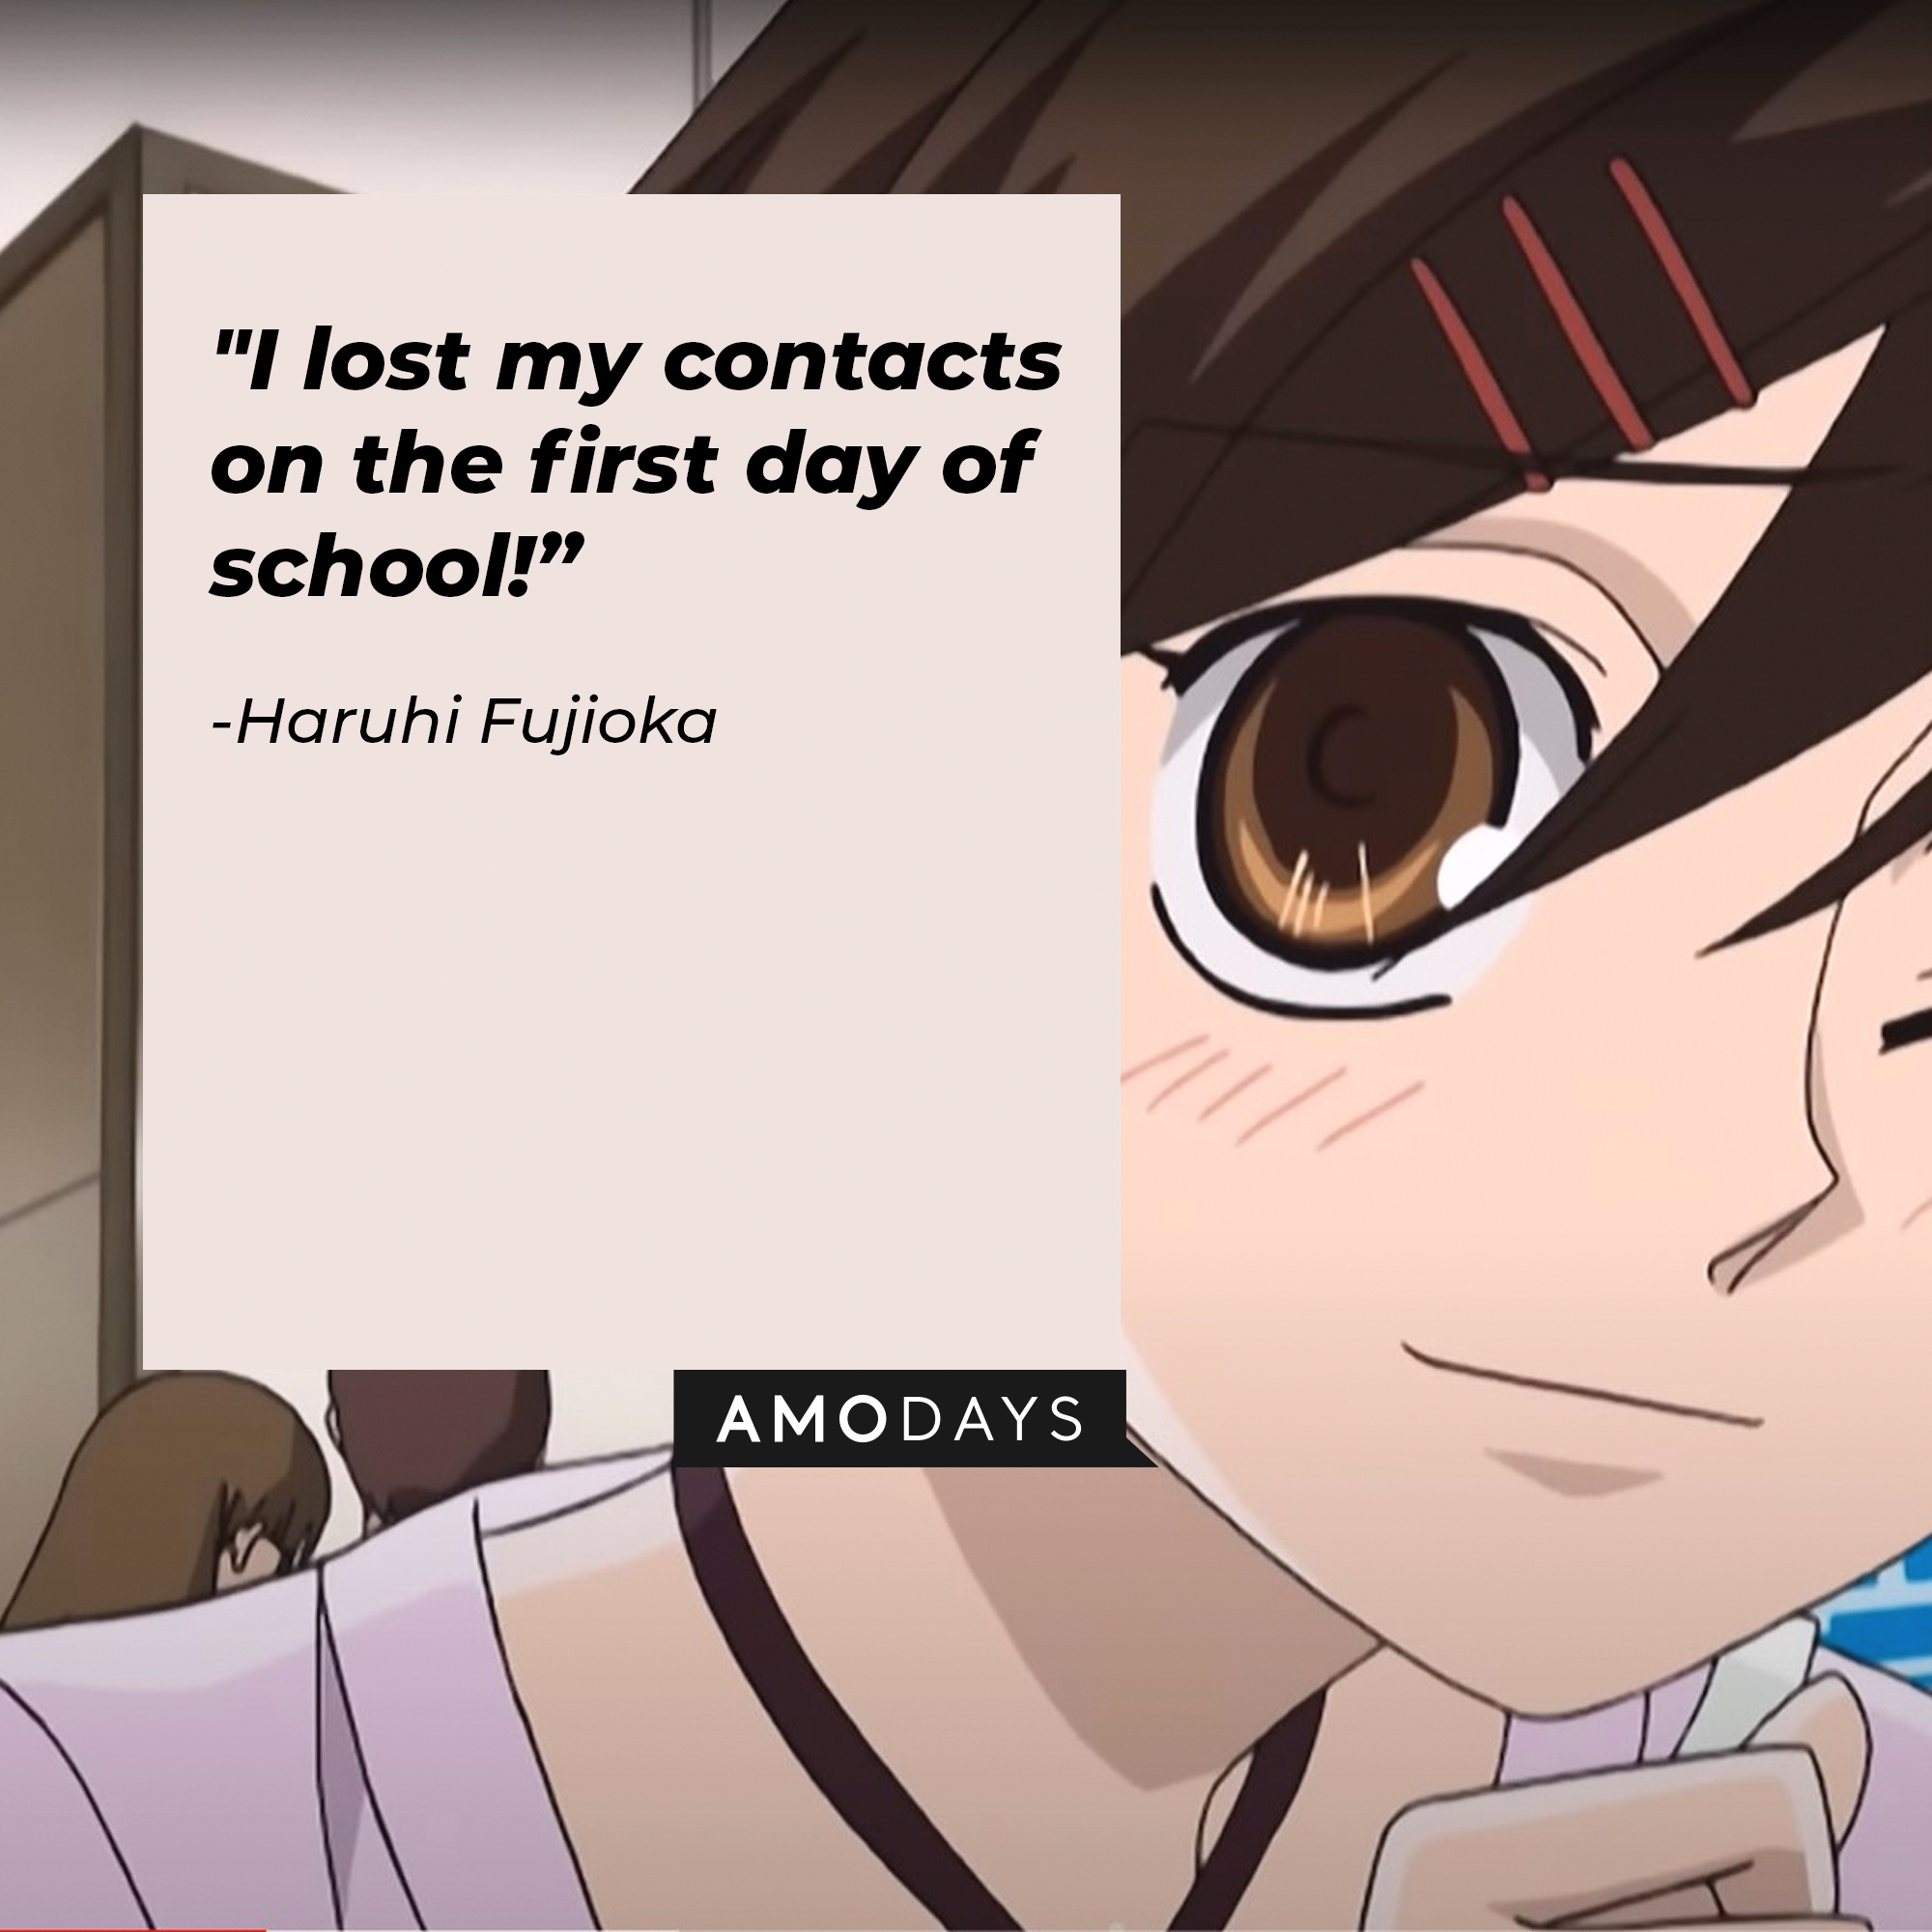 A picture of the anime character Haruhi Fujioka with a quote by her that reads, "I lost my contacts on the first day of school!” | Image: facebook.com/theouranhostclub